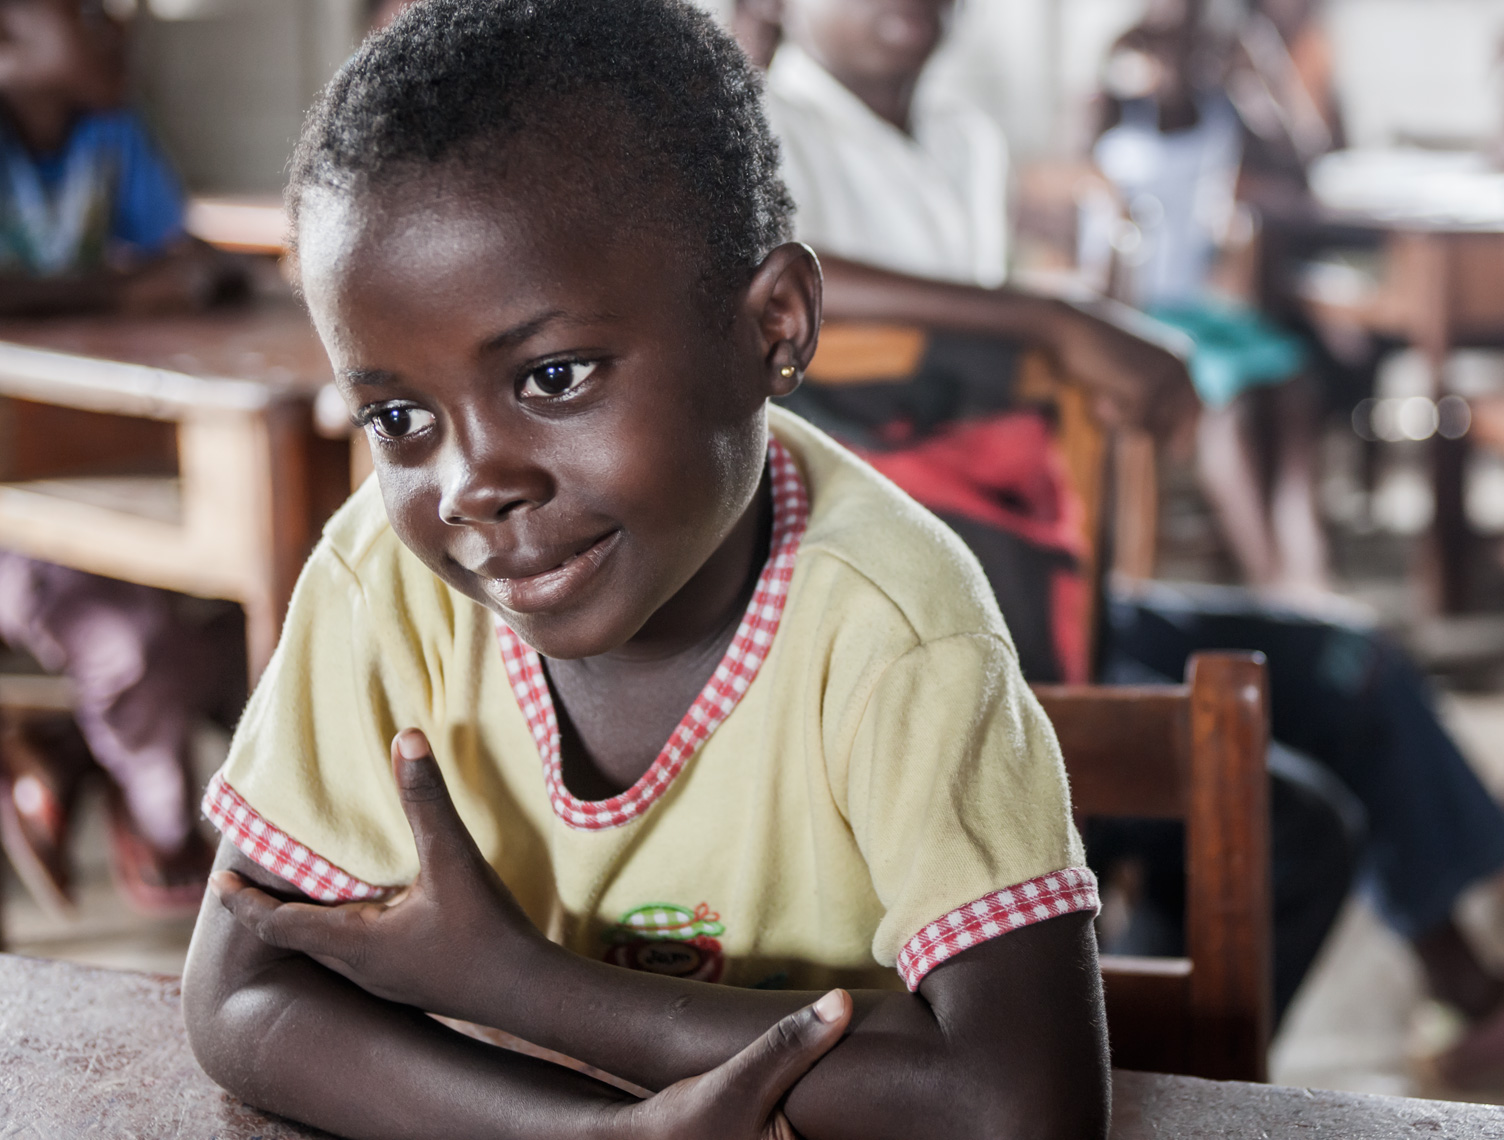 Students attend school in Bata, Equatorial Guinea, West Africa. Shot on assignment for Inc Design.